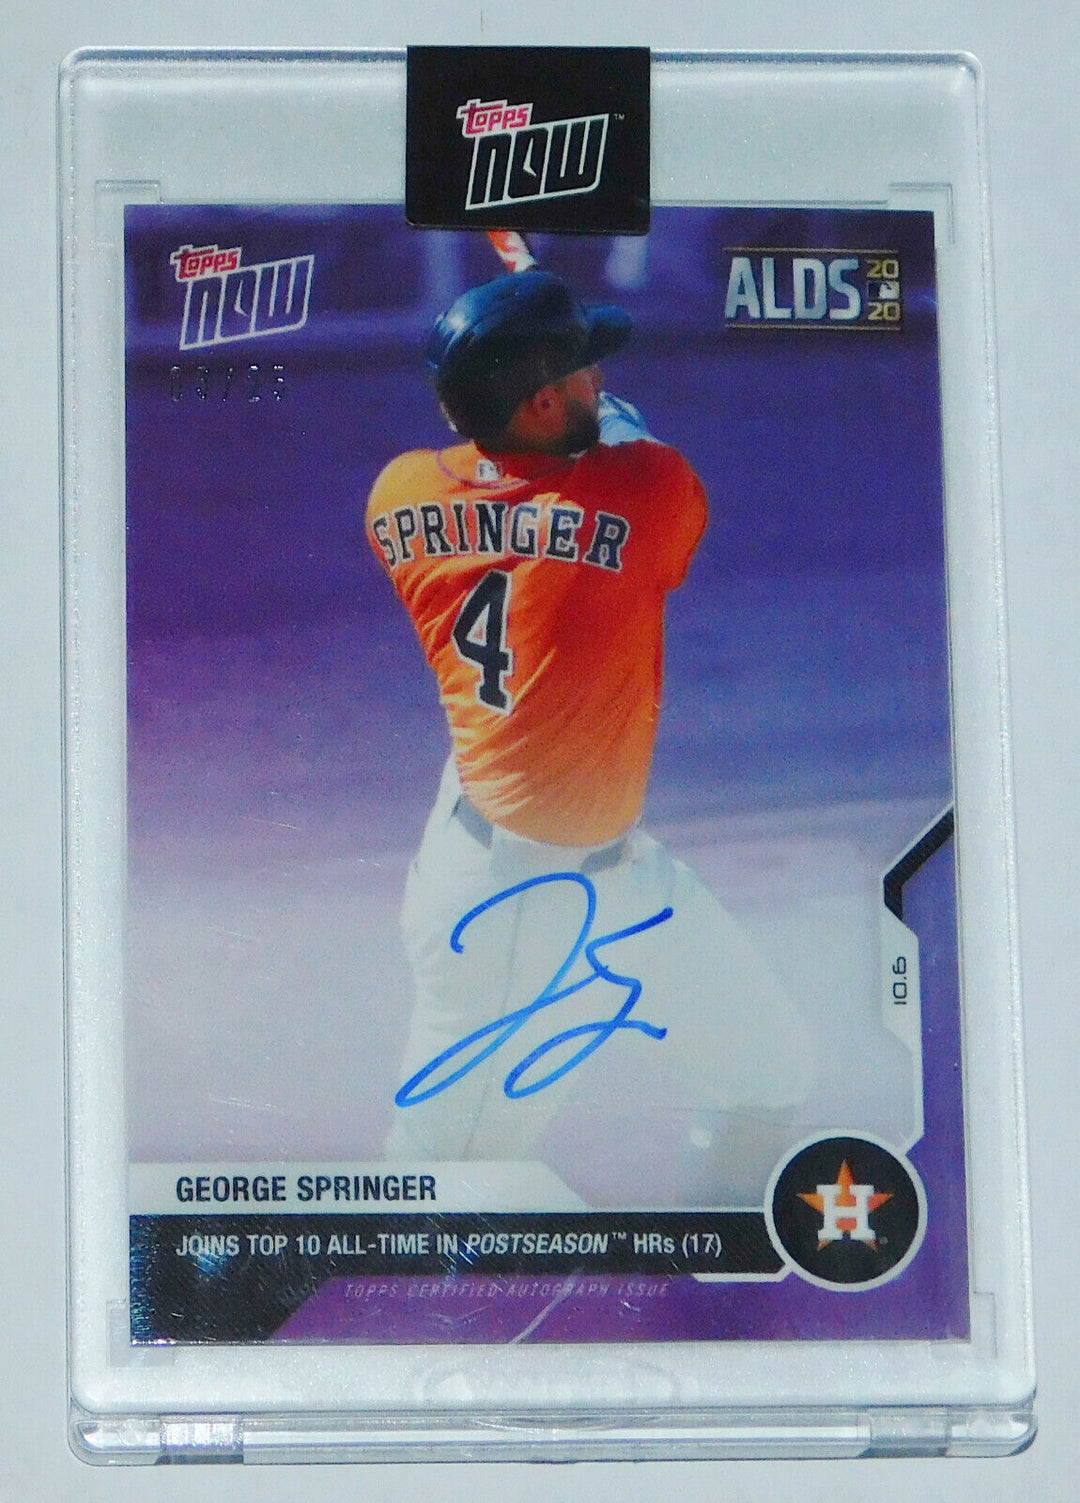 2020 GEORGE SPRINGER SIGNED ALDS TOP 10 ALL-TIME HR's TOPPS NOW AUTO CARD #371A Image 3